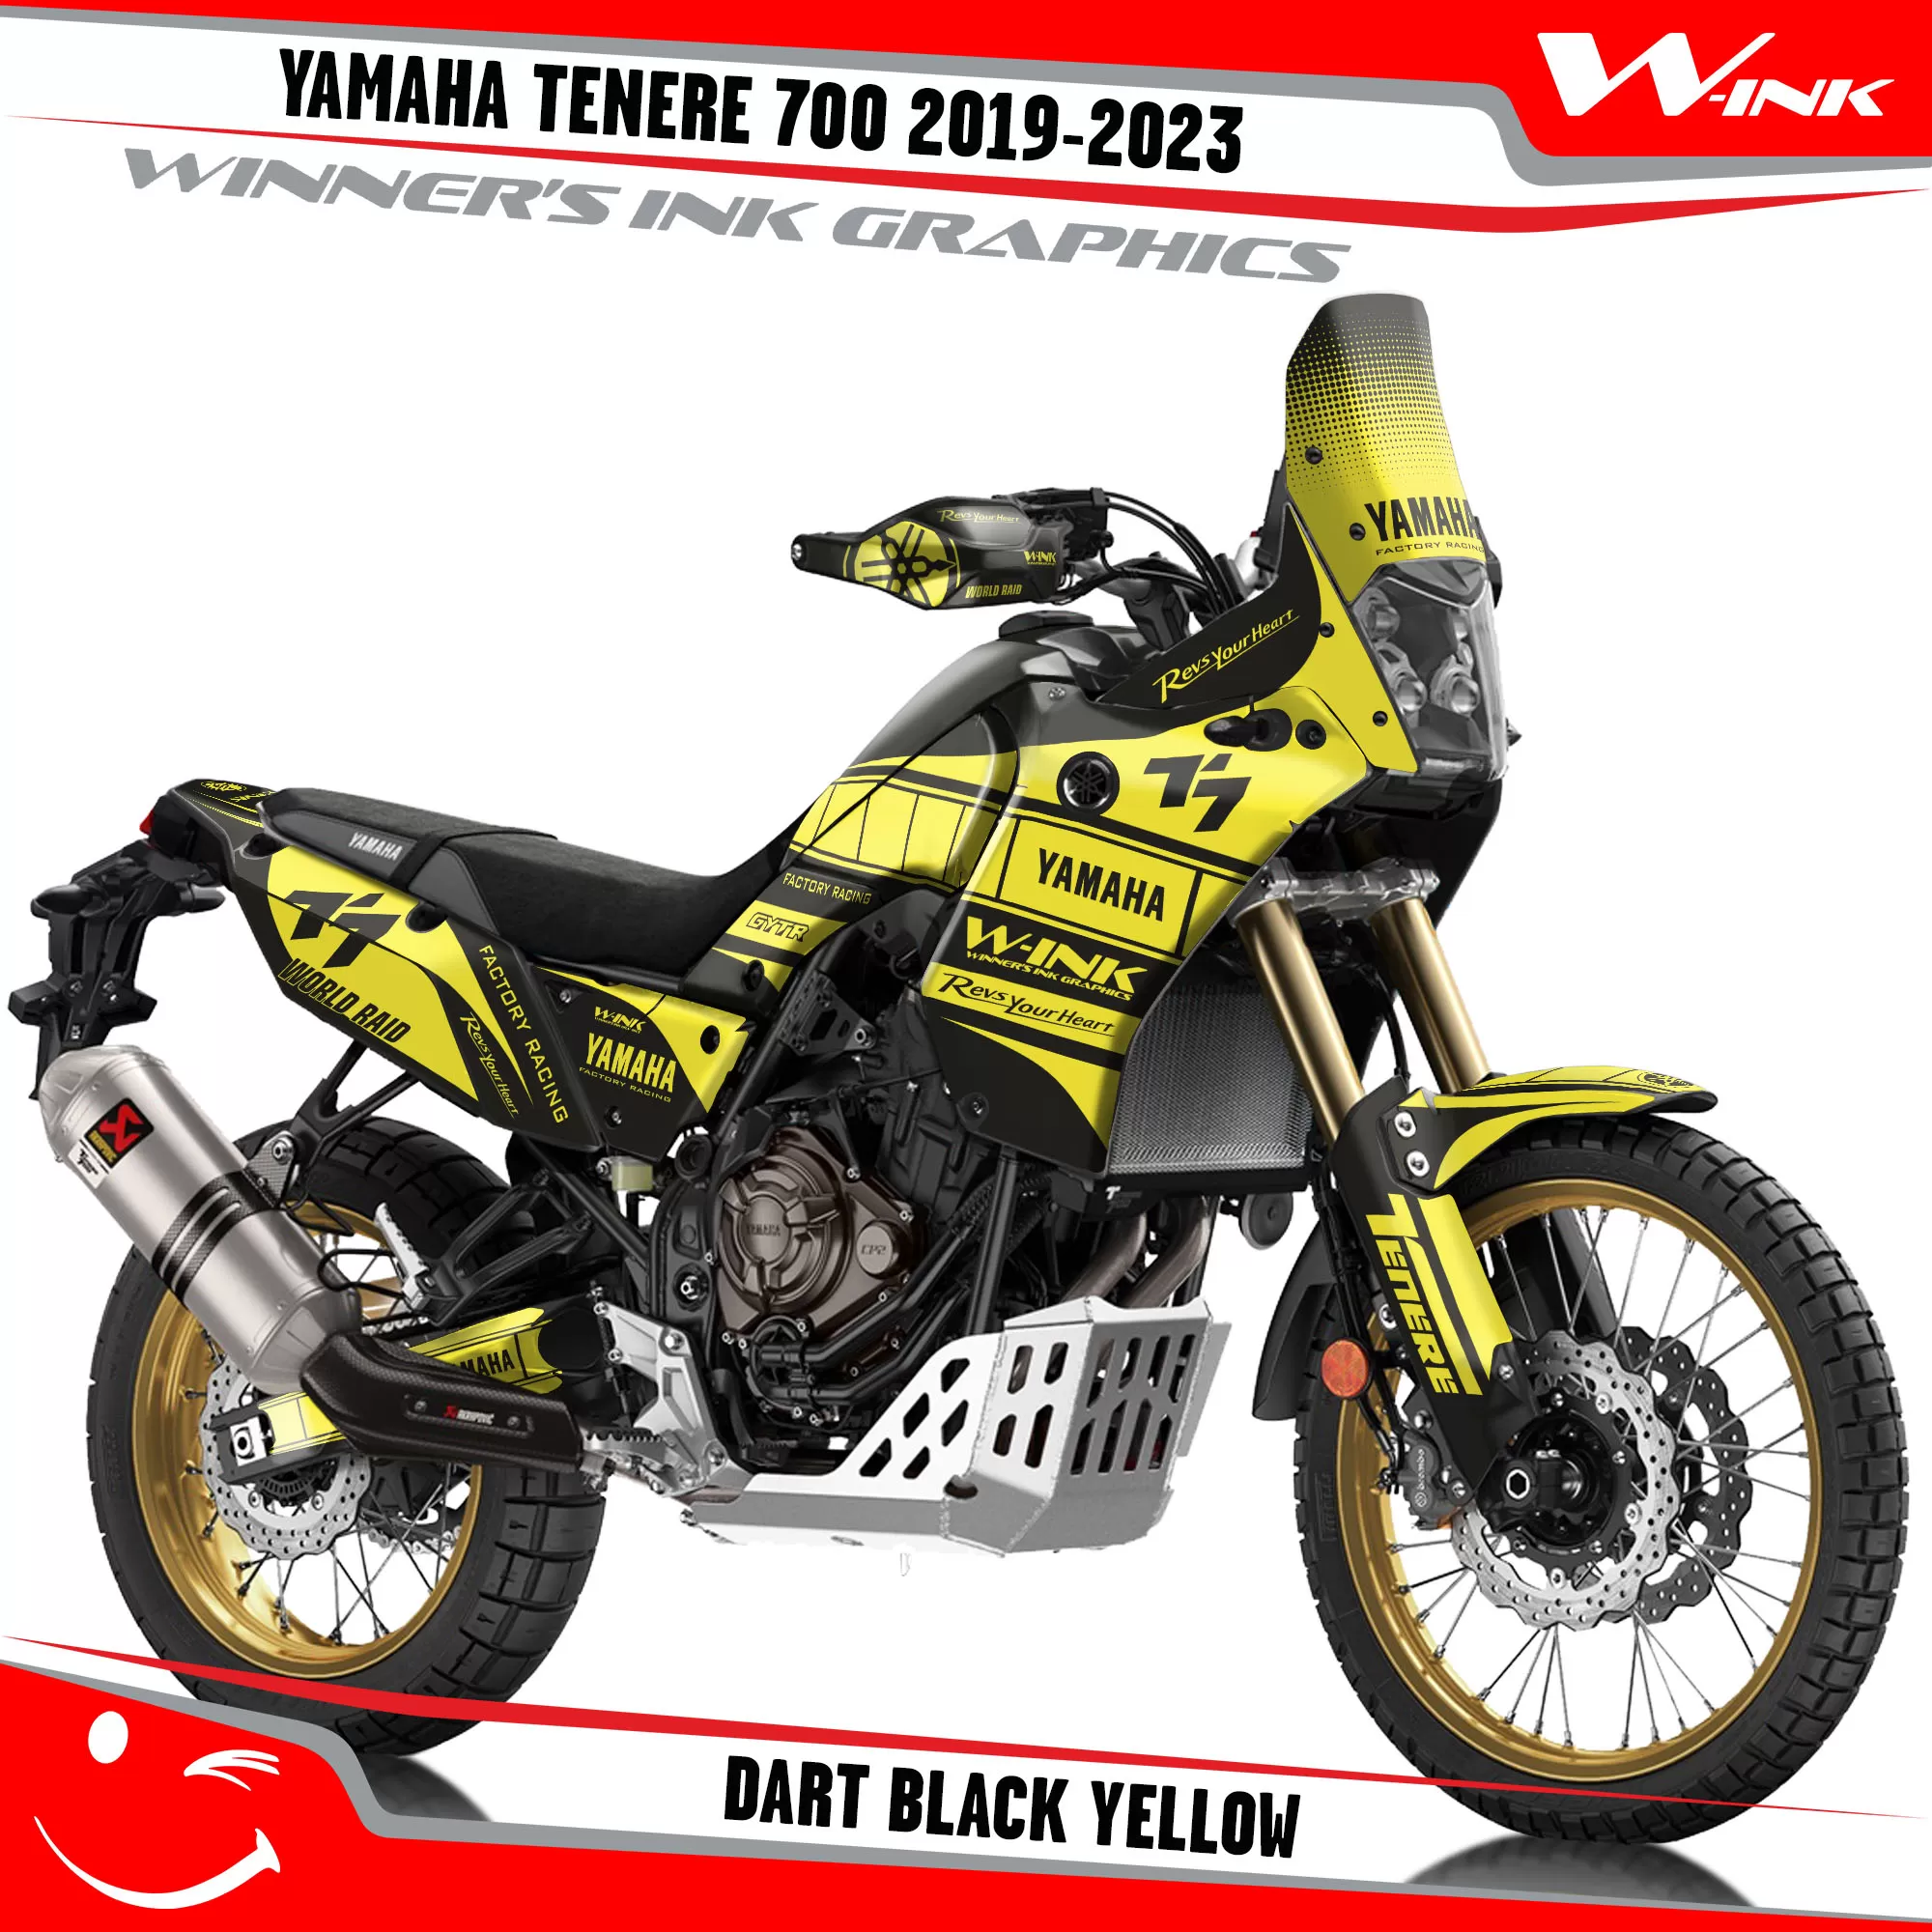 Yamaha-Tenere-700-2019-2020-2021-2022-2023-graphics-kit-and-decals-with-desing-Dart-Full-Black-Yellow